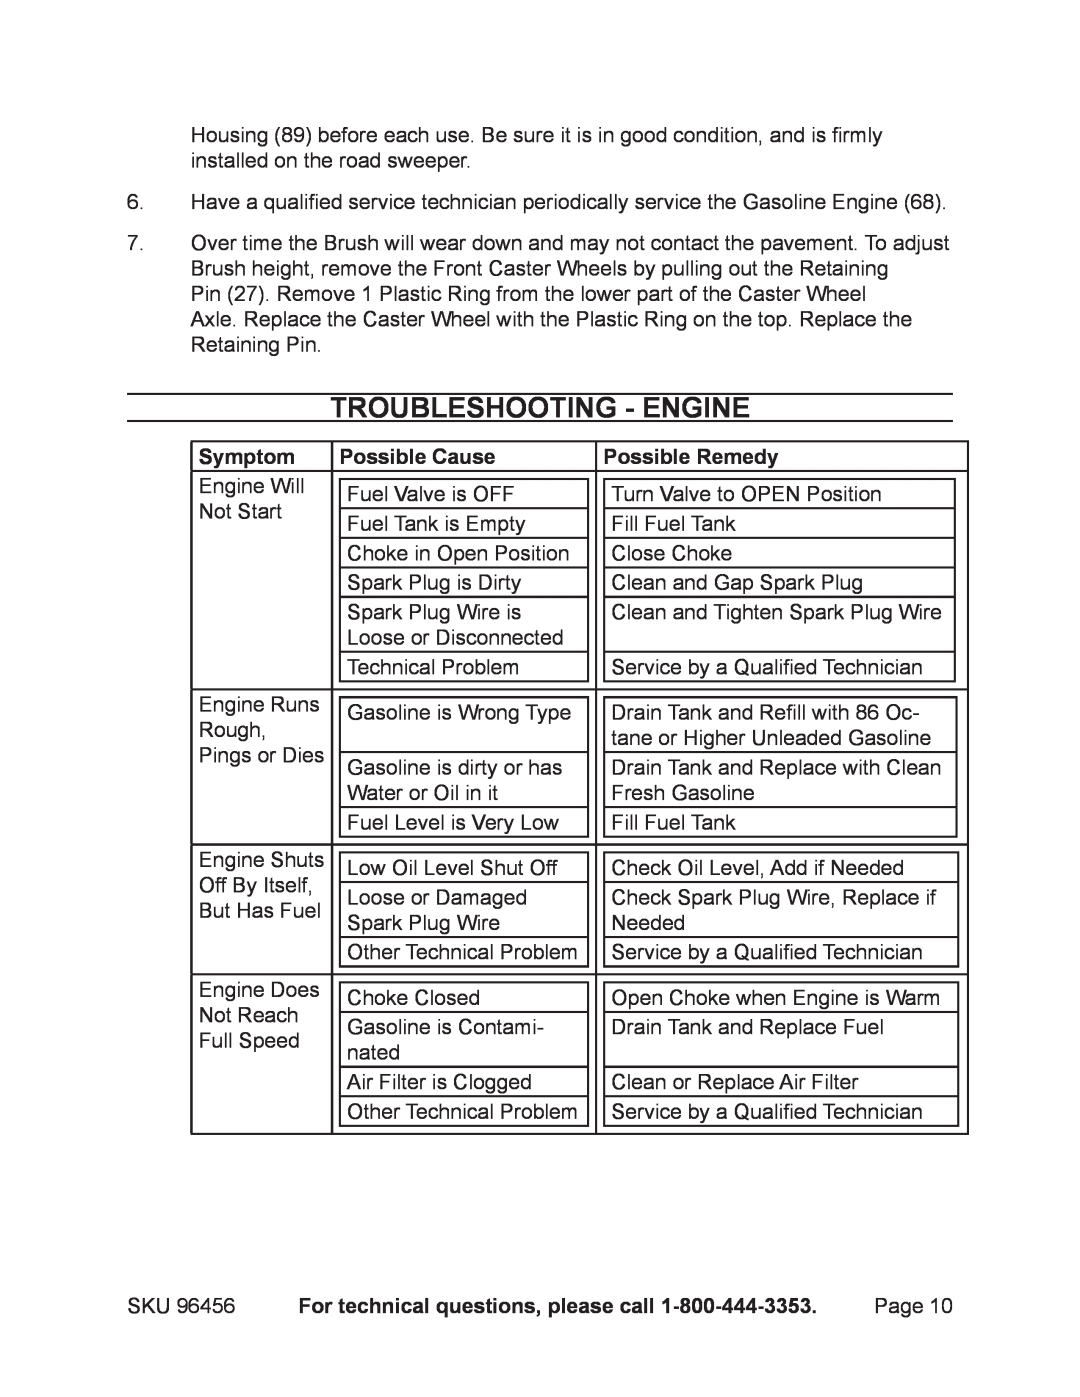 Harbor Freight Tools 96456 manual TroubleShooting - Engine, Symptom, Possible Cause, Possible Remedy 